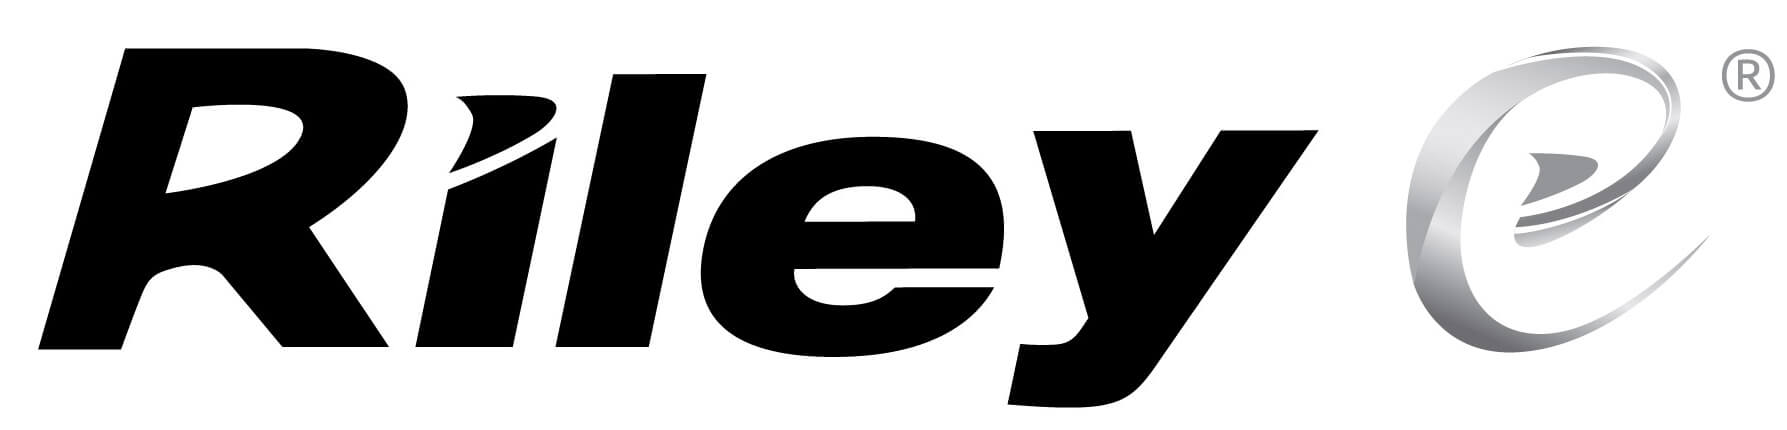 Riley Logo - Introducing Riley® Brand New Range of High Performance Safety